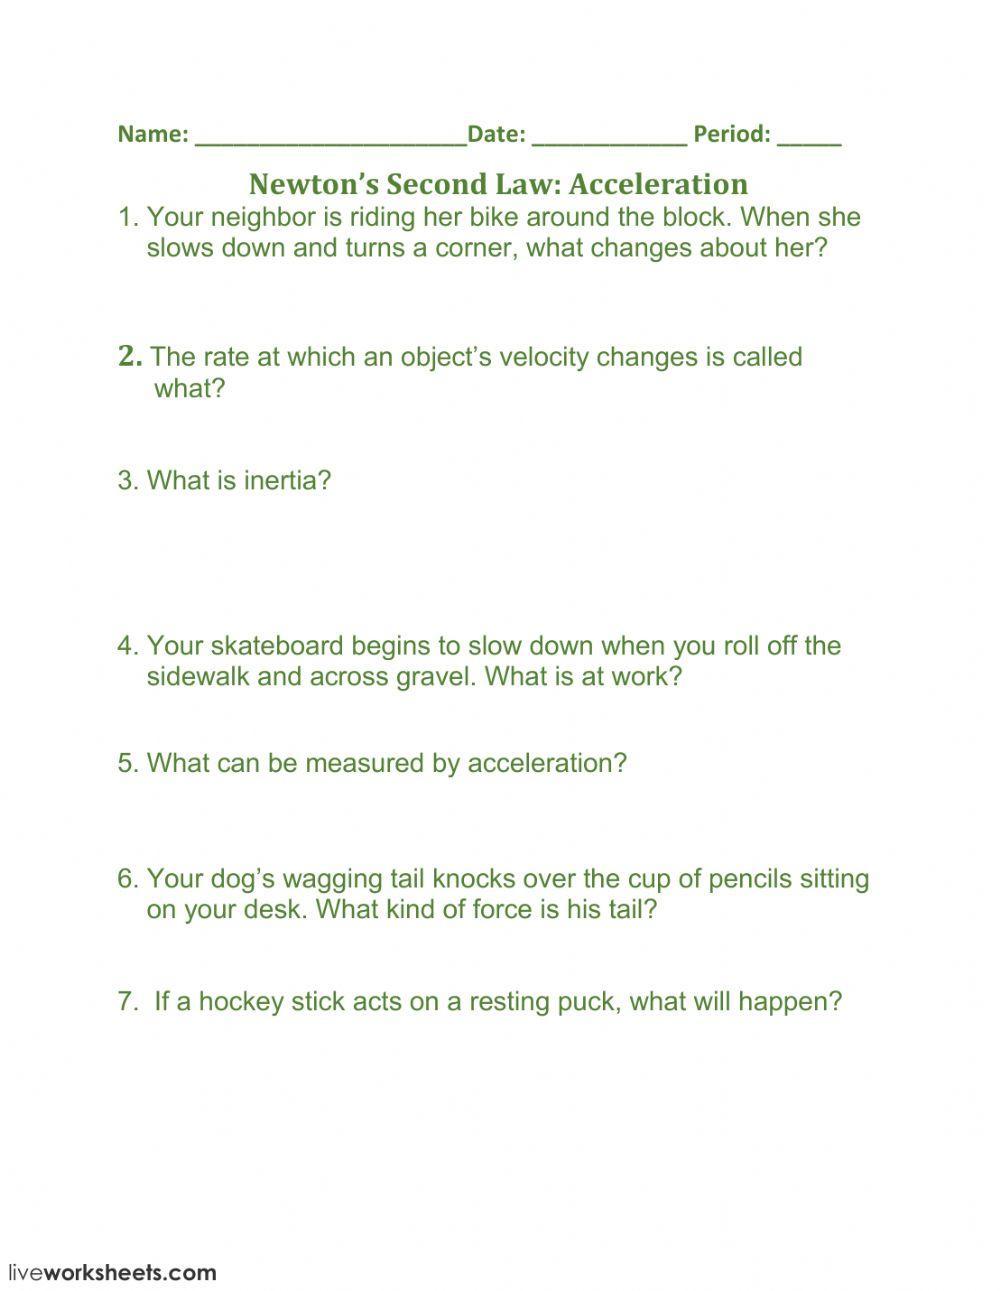 Newton’s Second Law: Acceleration